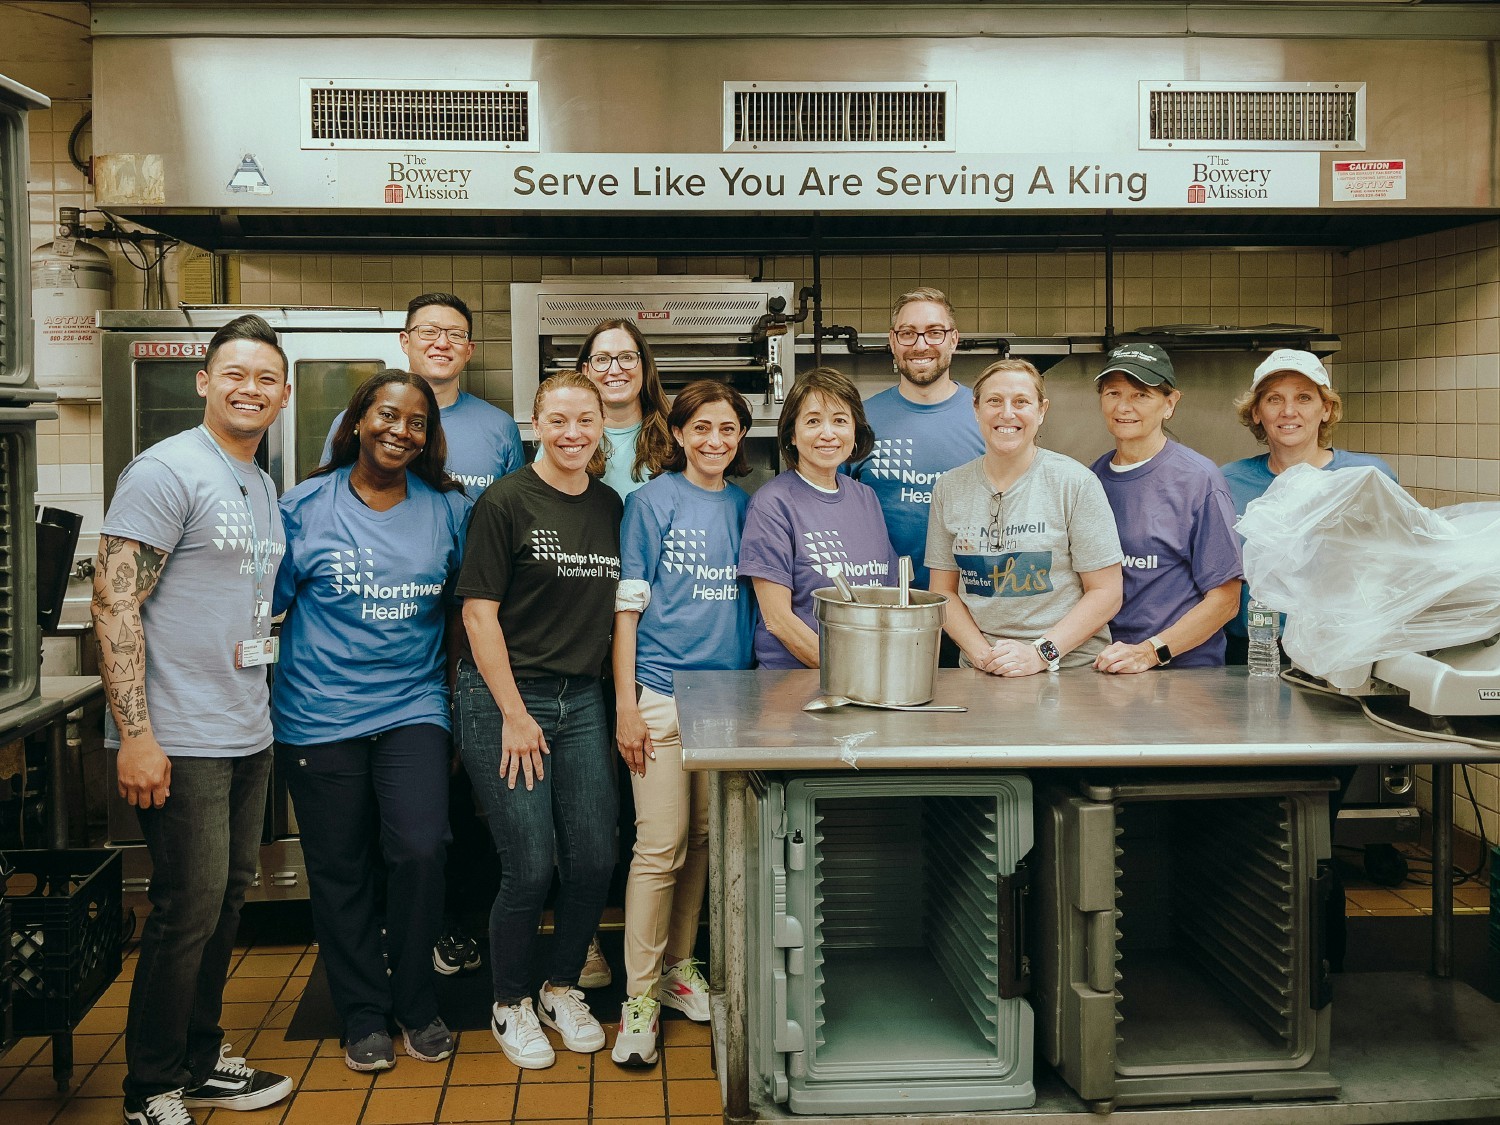 Our new executive volunteer day program connects our leaders to strategic community partners.